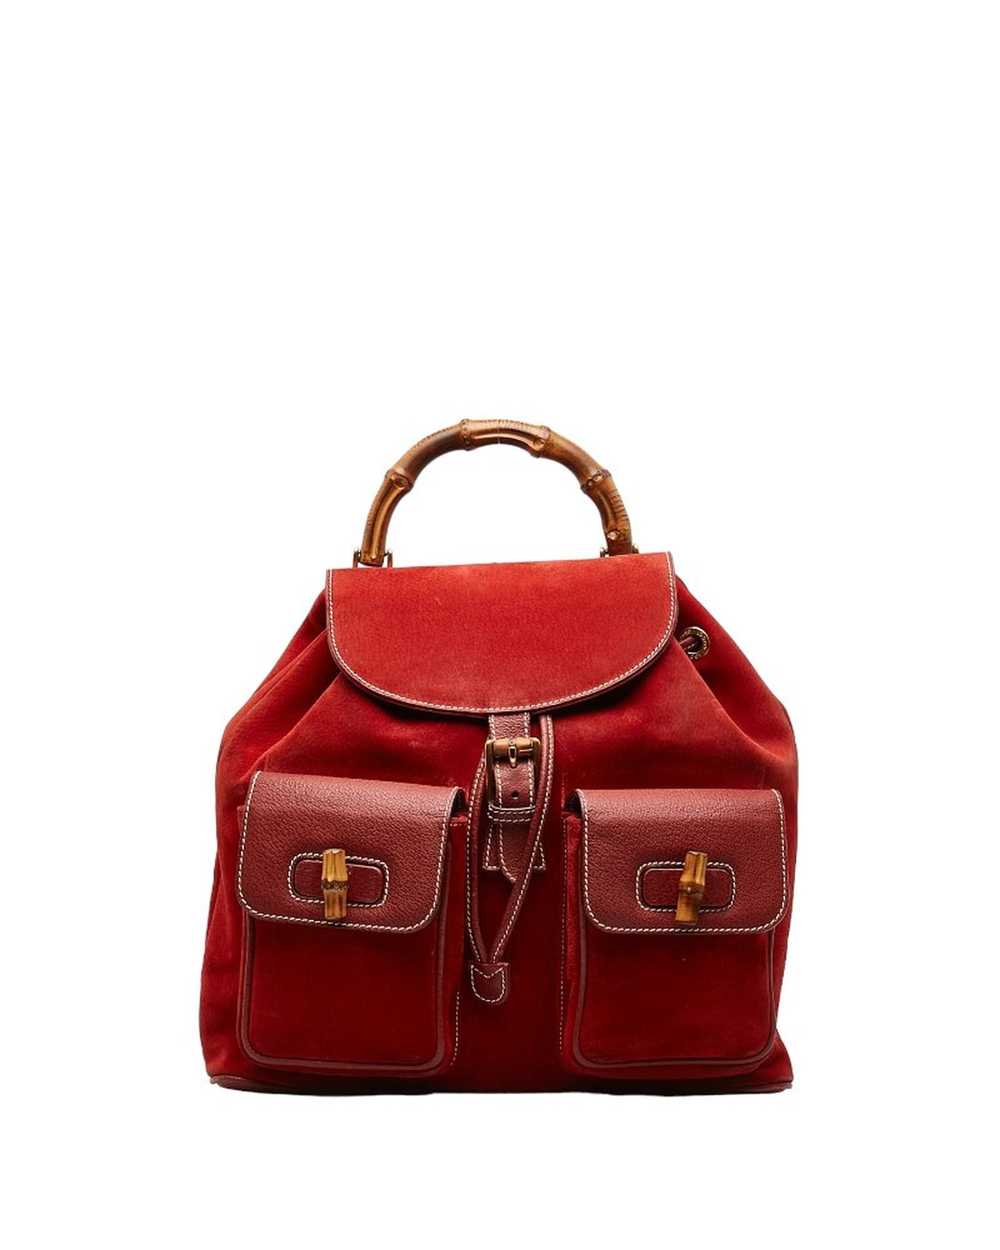 Gucci Red Suede Bamboo Backpack Bag - image 1